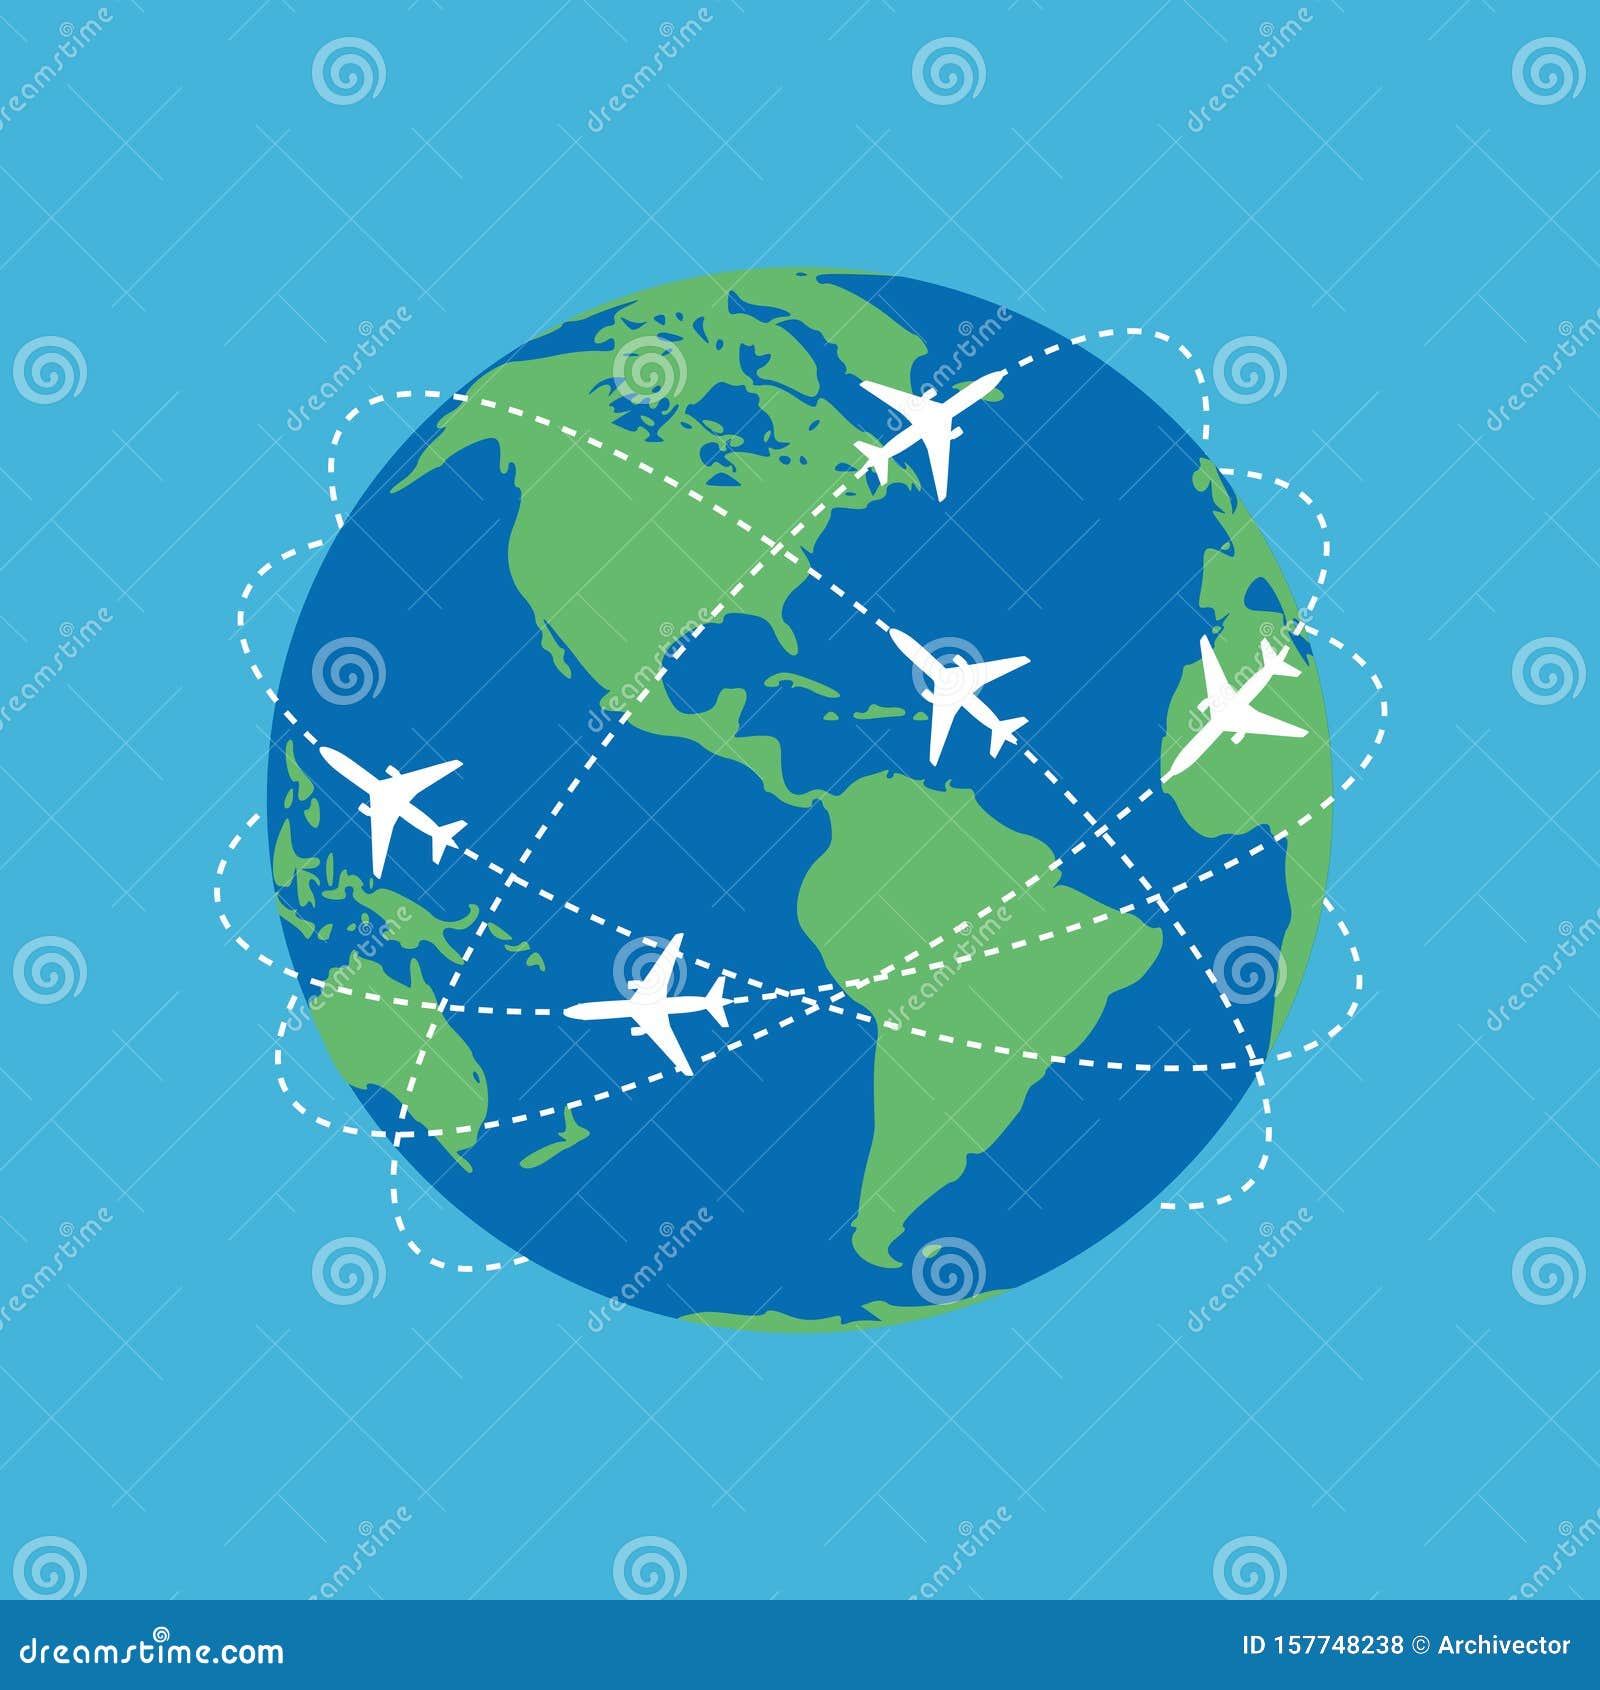 Aviation Routes Around the World Stock Vector - Illustration of ...